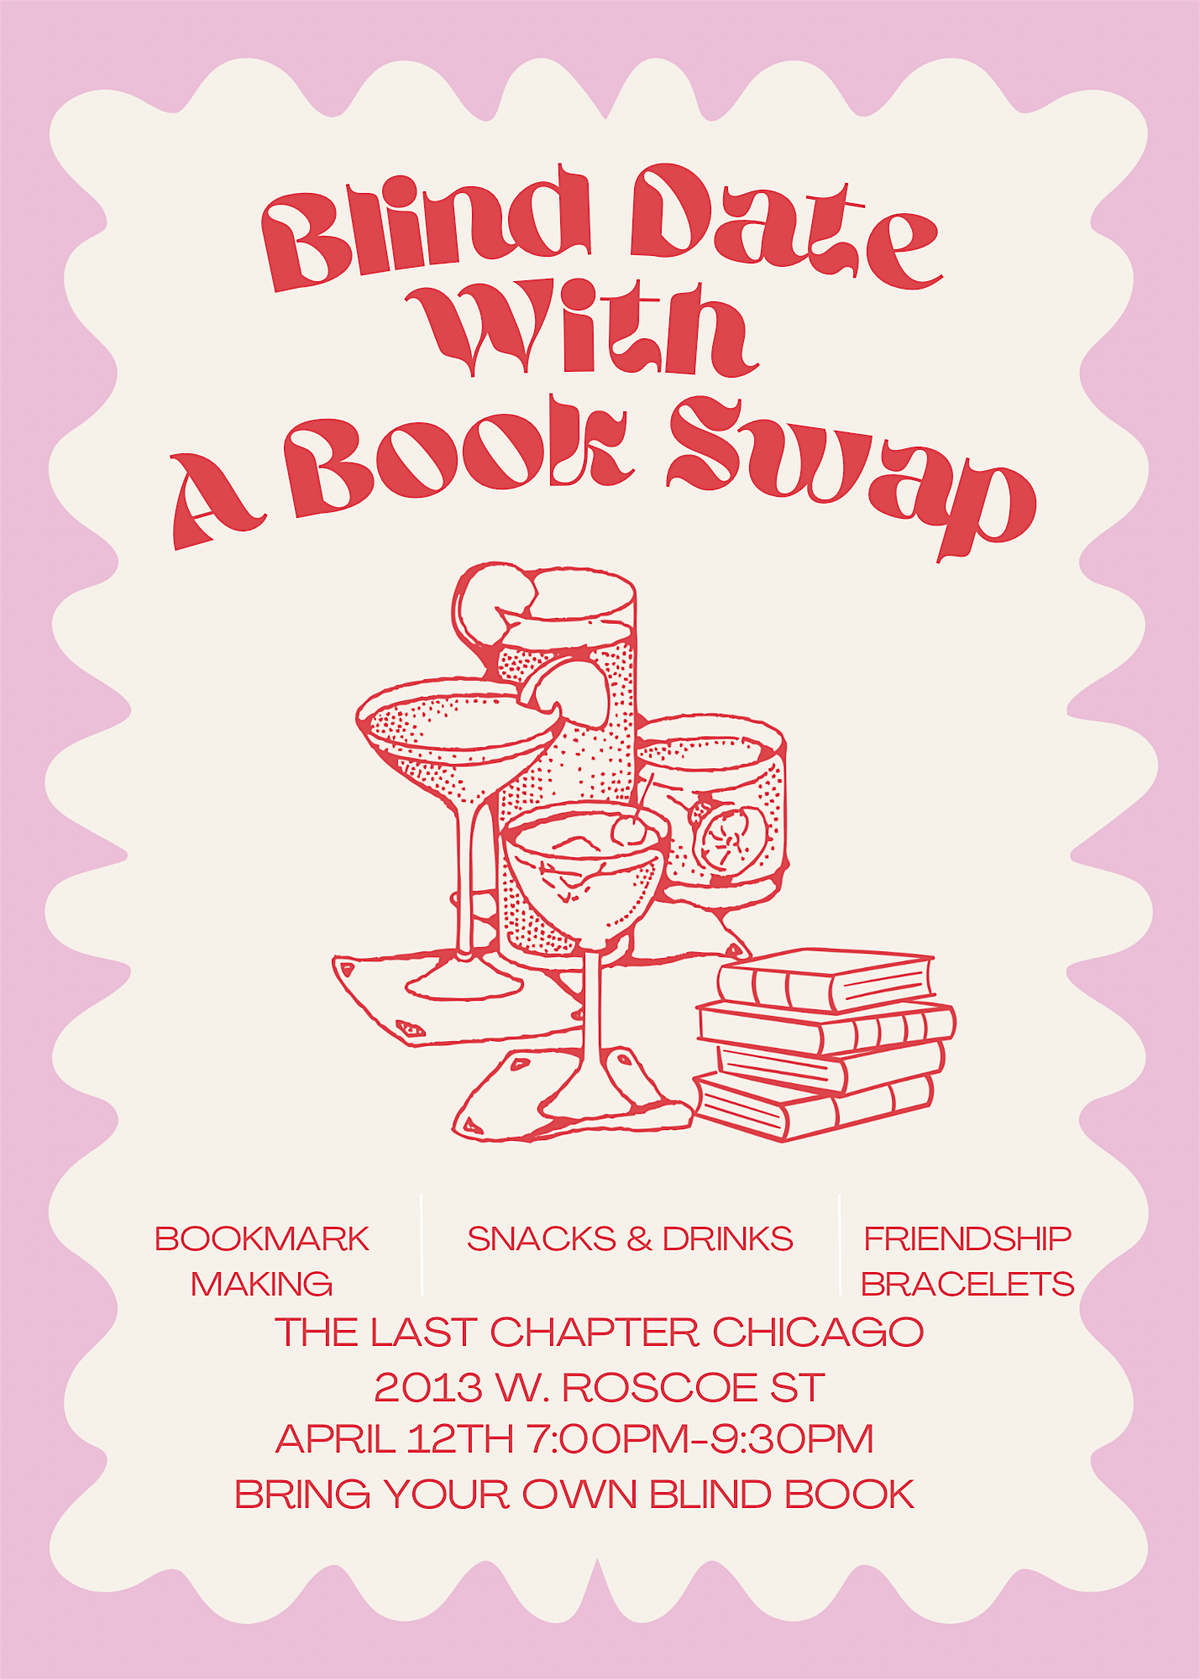 Blind Date with a Book Swap